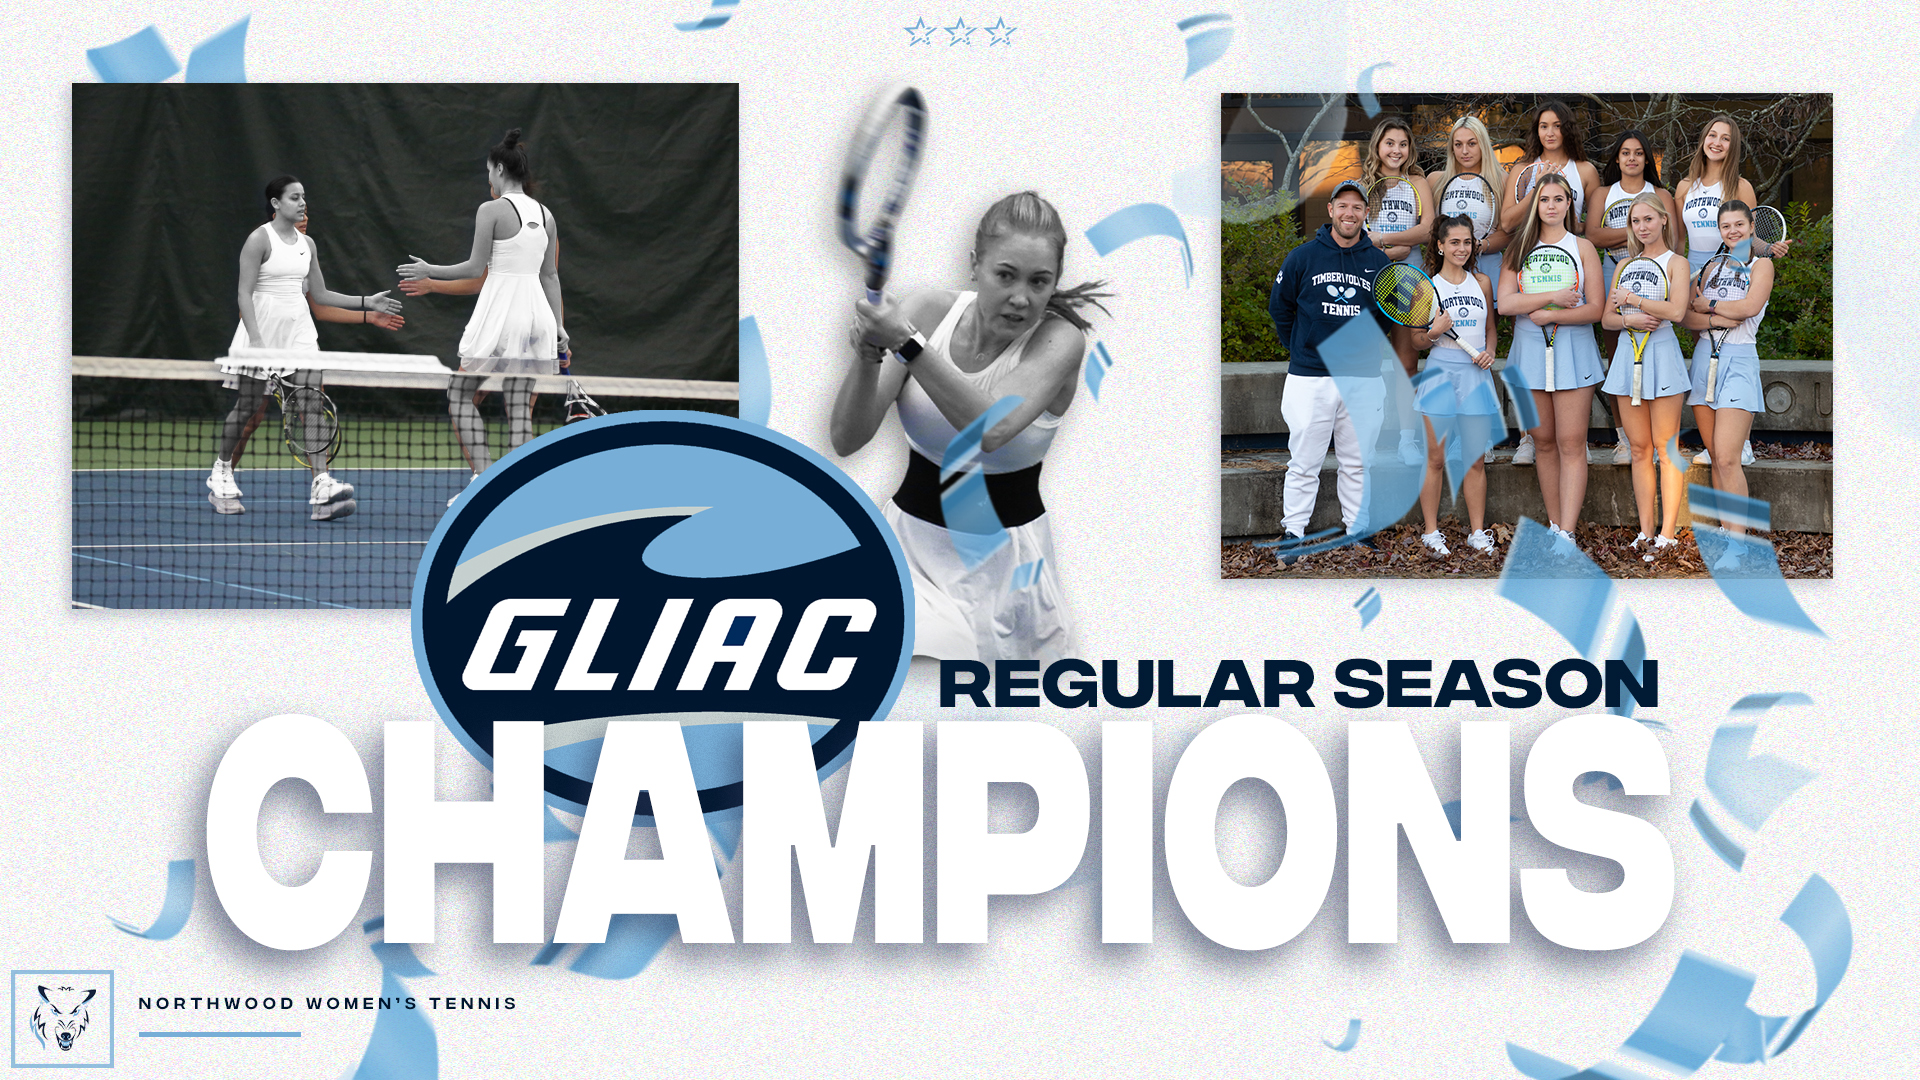 GLIAC Champs! Women's Tennis Earns Share Of Title With 5-2 Win Over Wayne State